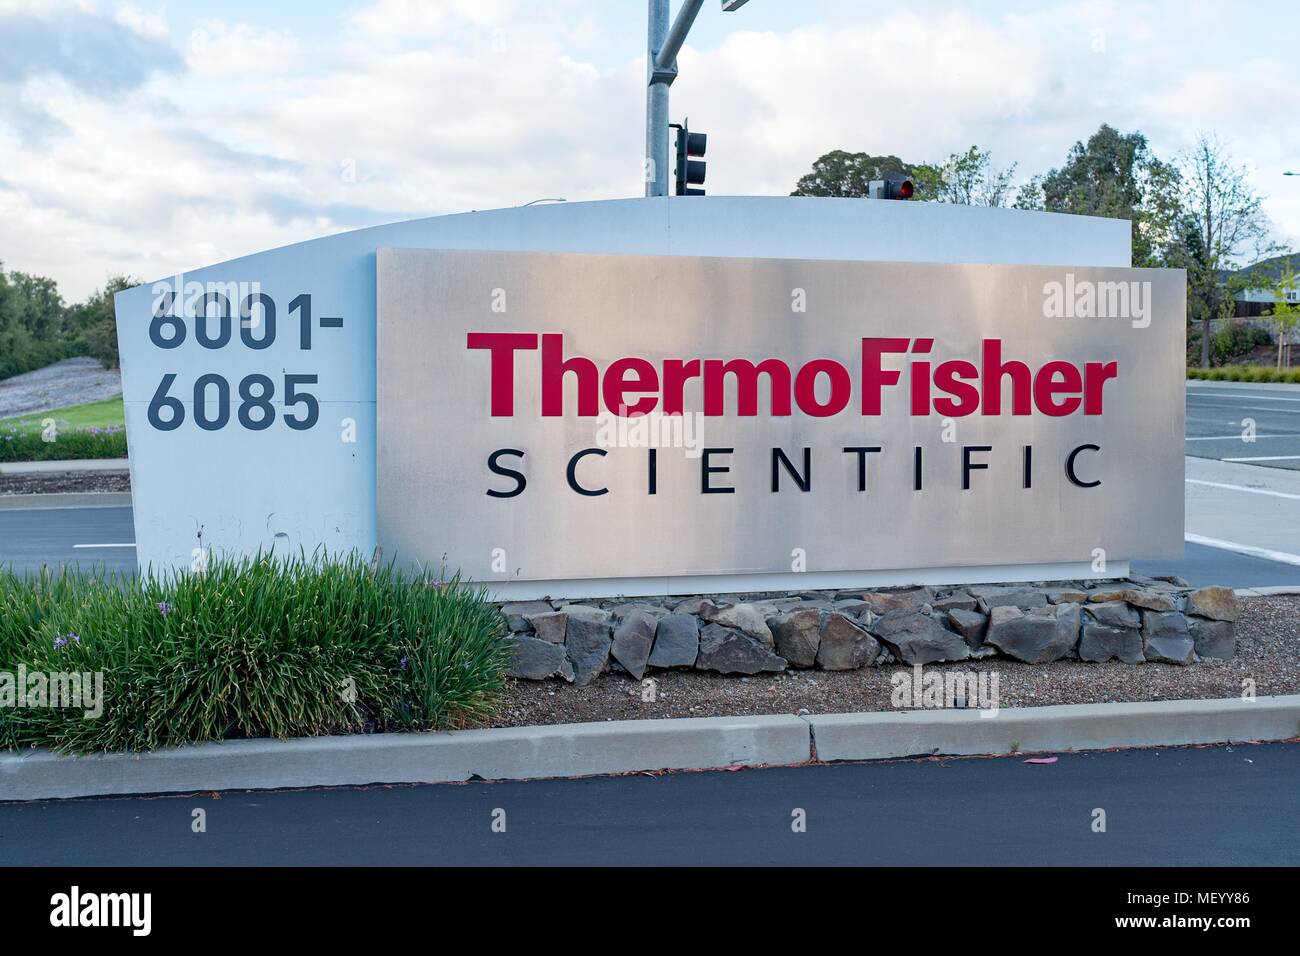 Company Thermo Fisher High Resolution Stock Photography and Images - Alamy